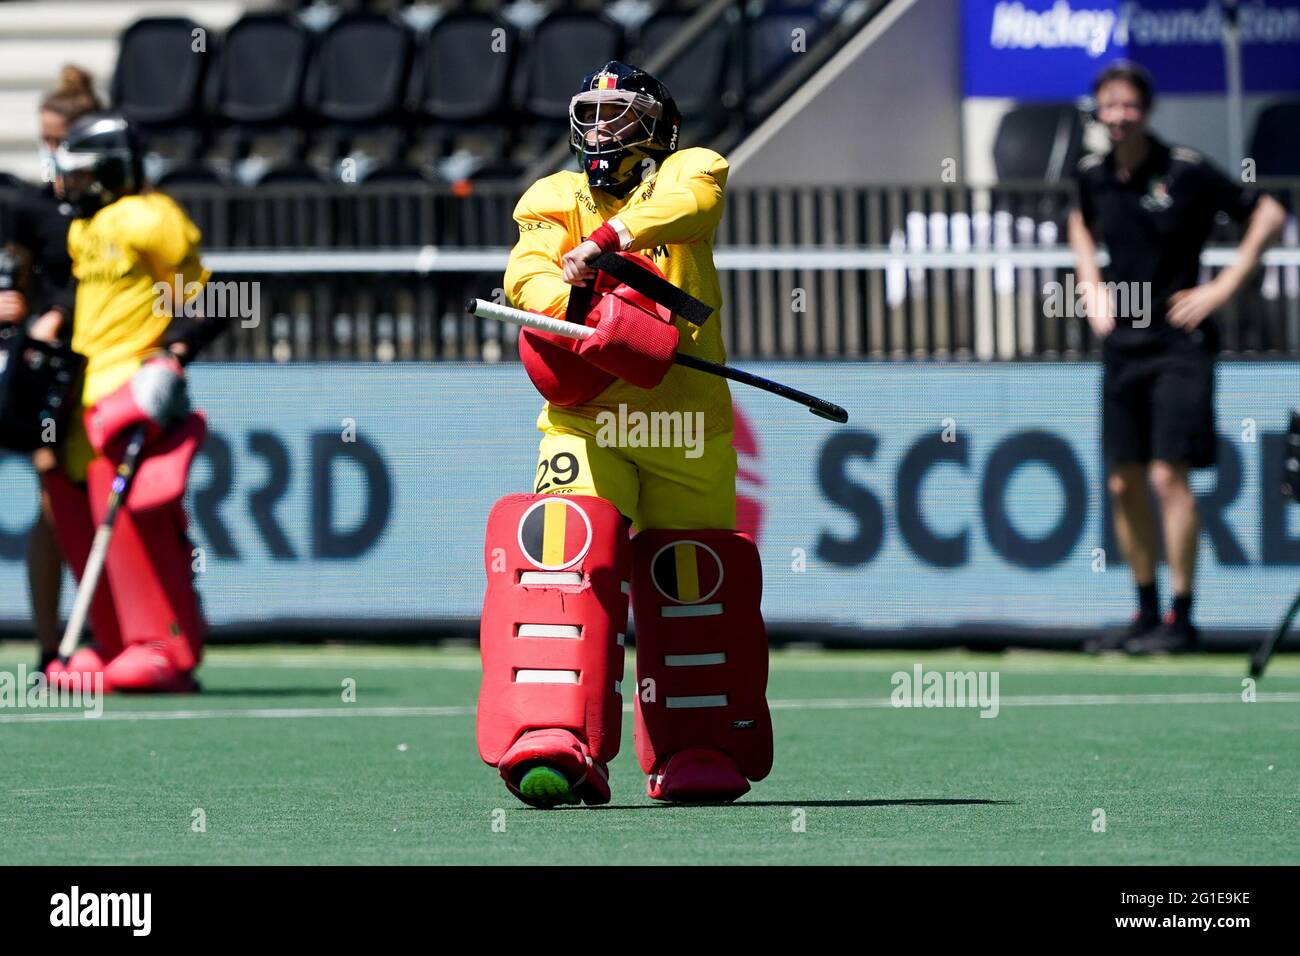 AMSTELVEEN, NETHERLANDS - JUNE 6: Elodie Picard of Belgium during the Euro Hockey Championships match between Duitsland and Belgie at Wagener Stadion Stock Photo